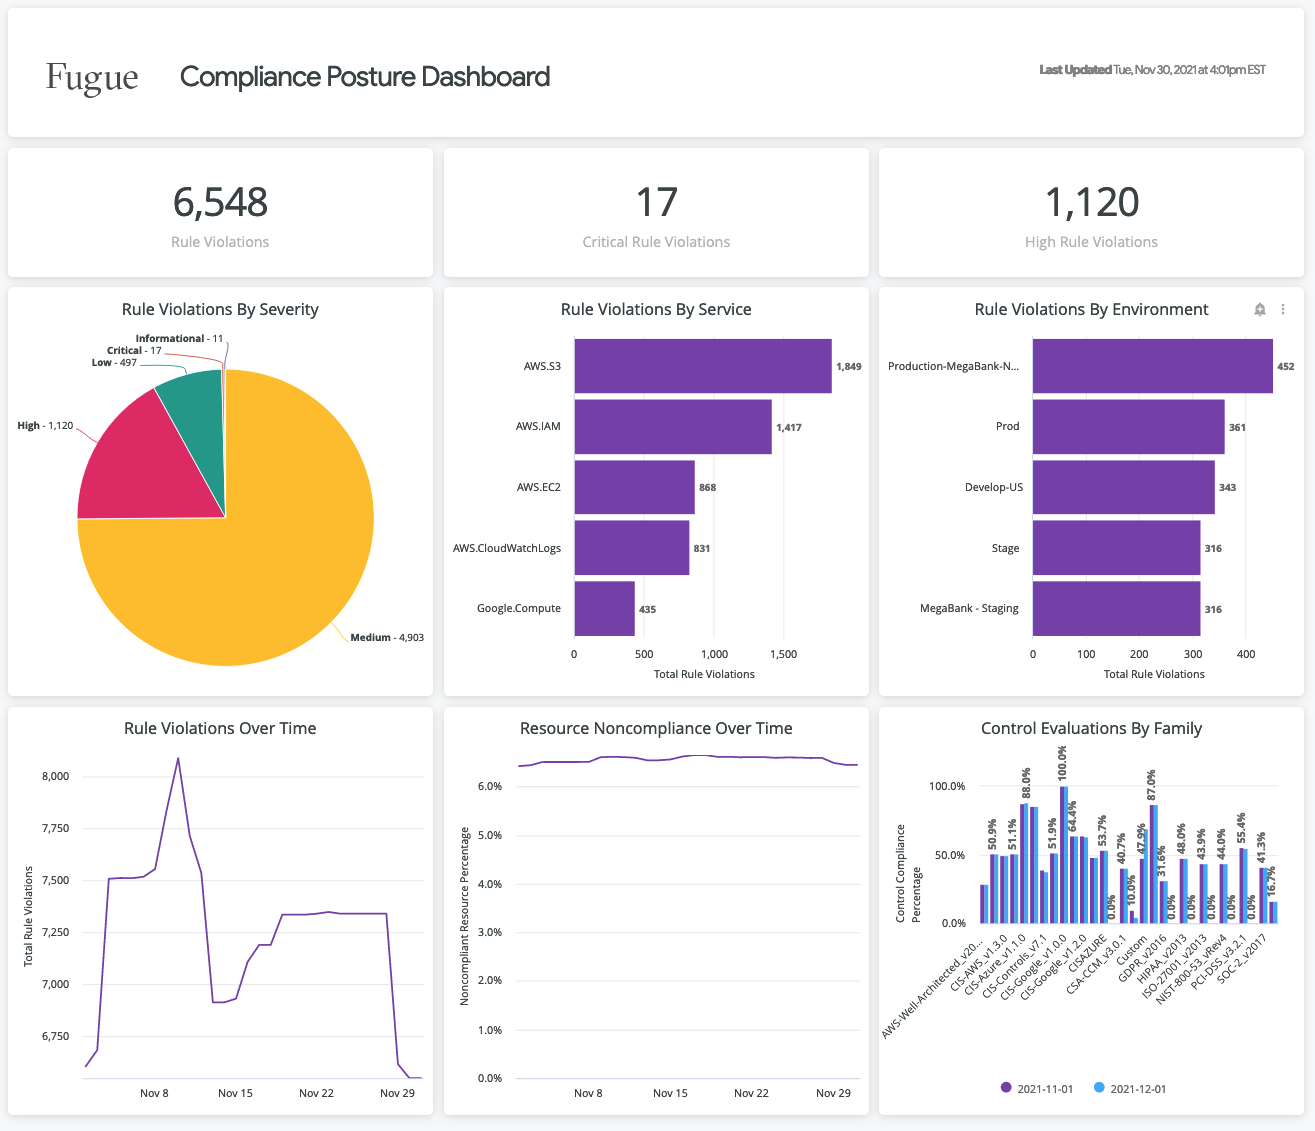 _images/compliance-posture-dashboard-1.png